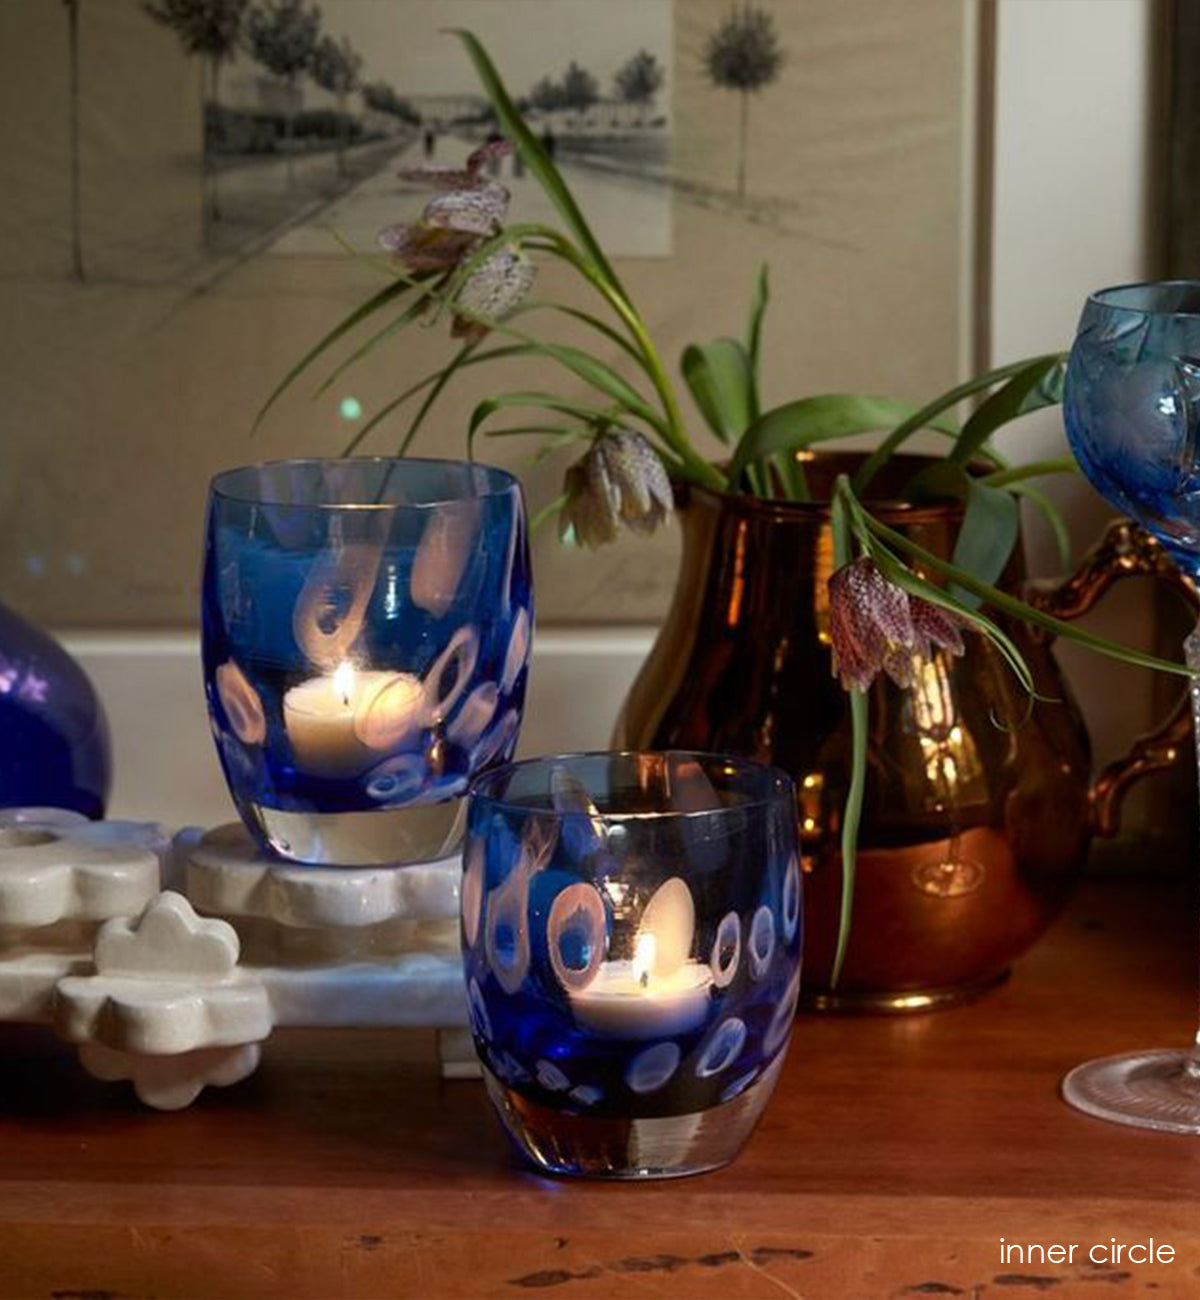 two inner circle, translucent dark blue and white murrini hand-blown glass votive candle holders on a wood dining room table with blue drinking glass, vase and flowers.